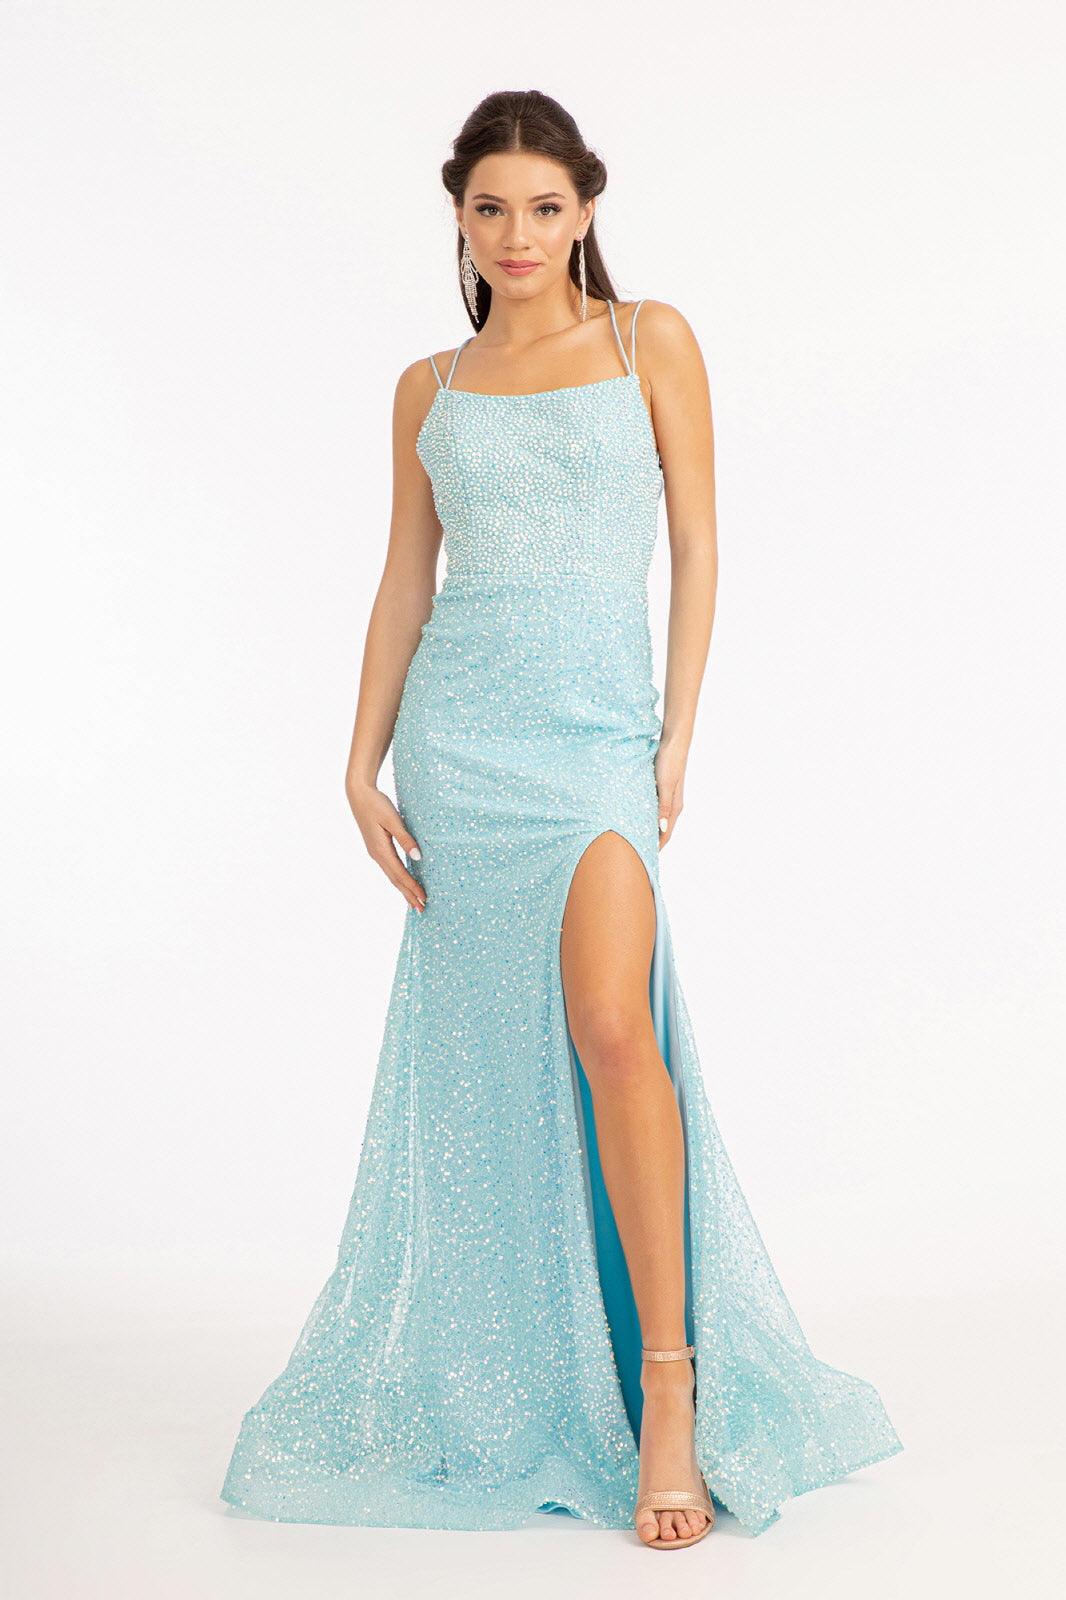 Long Formal Mesh Mermaid Prom Dress - The Dress Outlet